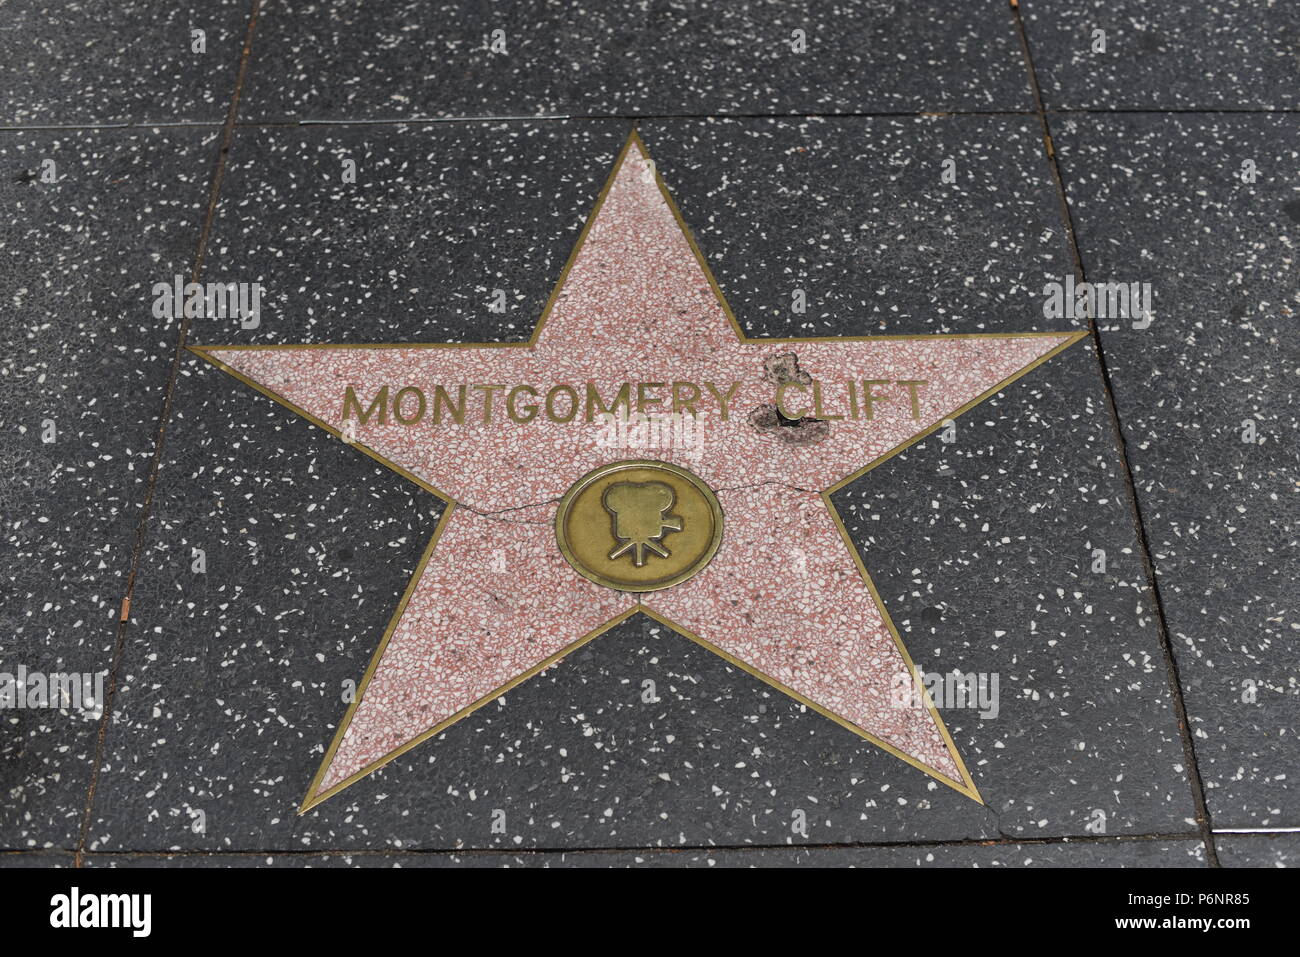 HOLLYWOOD, CA - June 29: Montgomery Clift star on the Hollywood Walk of Fame in Hollywood, California on June 29, 2018. Stock Photo